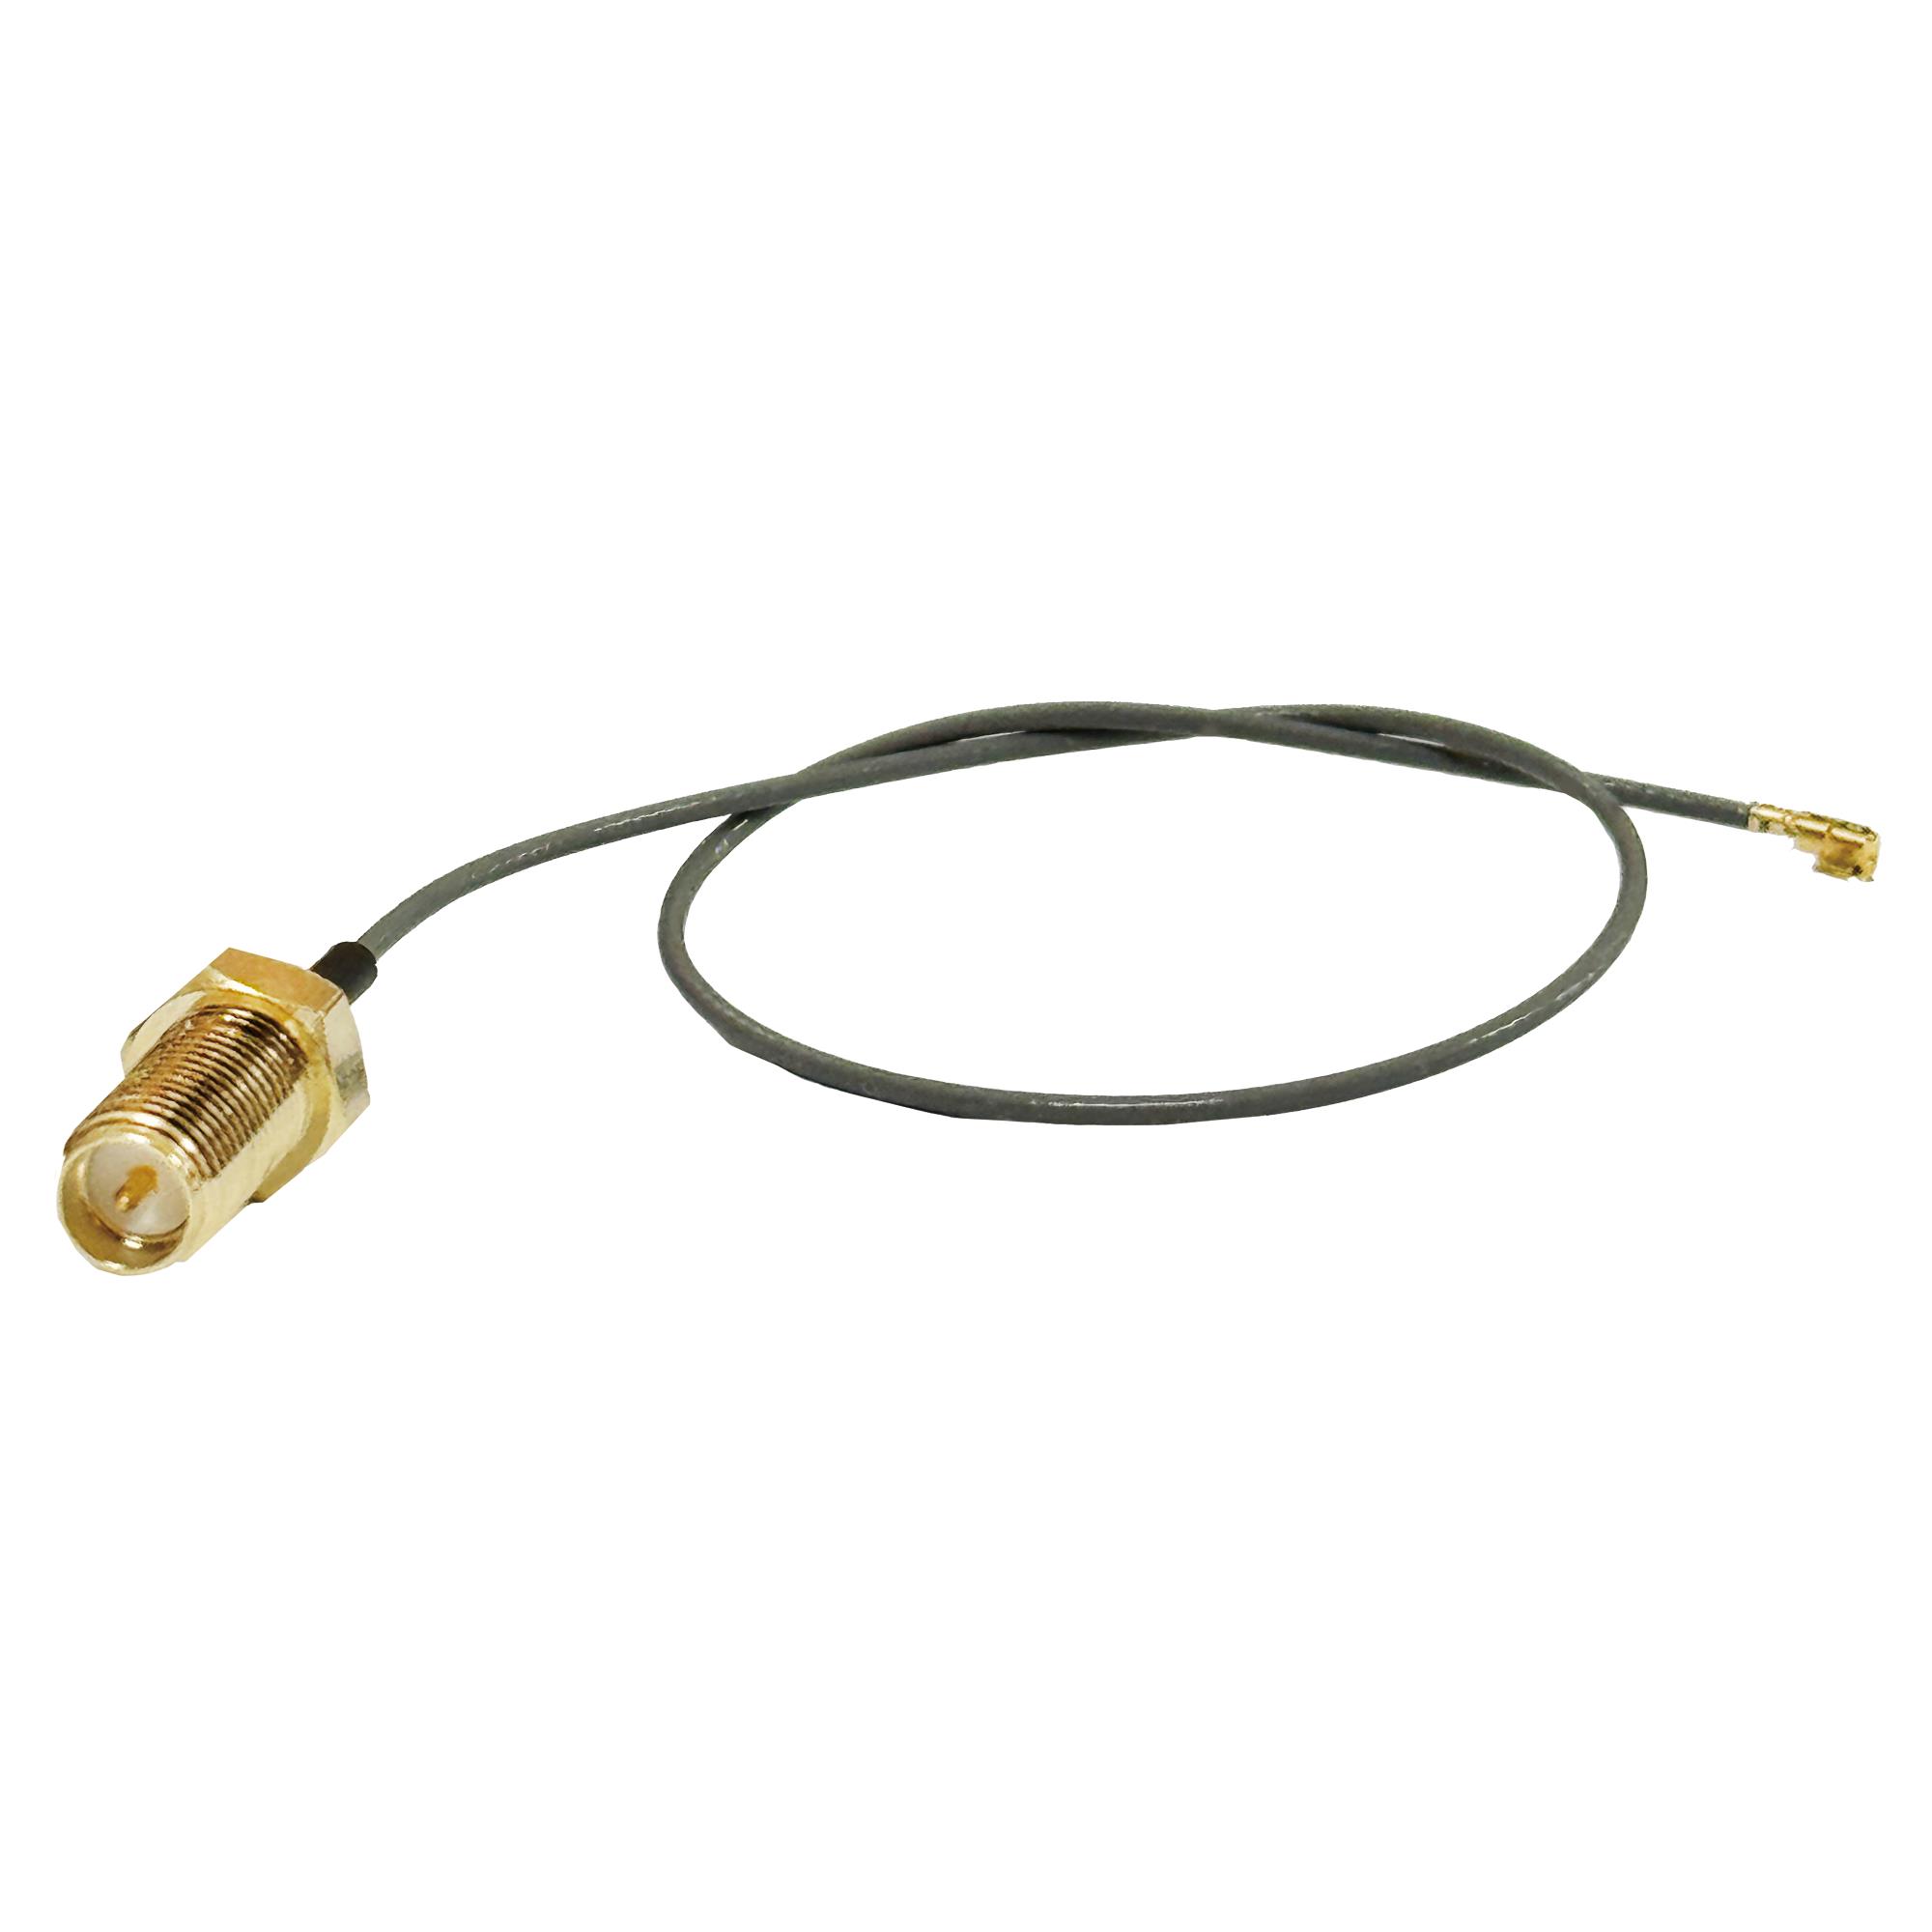 【CX-SAC0MPA1W0020】CABLE ASSEMBLY, SMA TO MHF-1